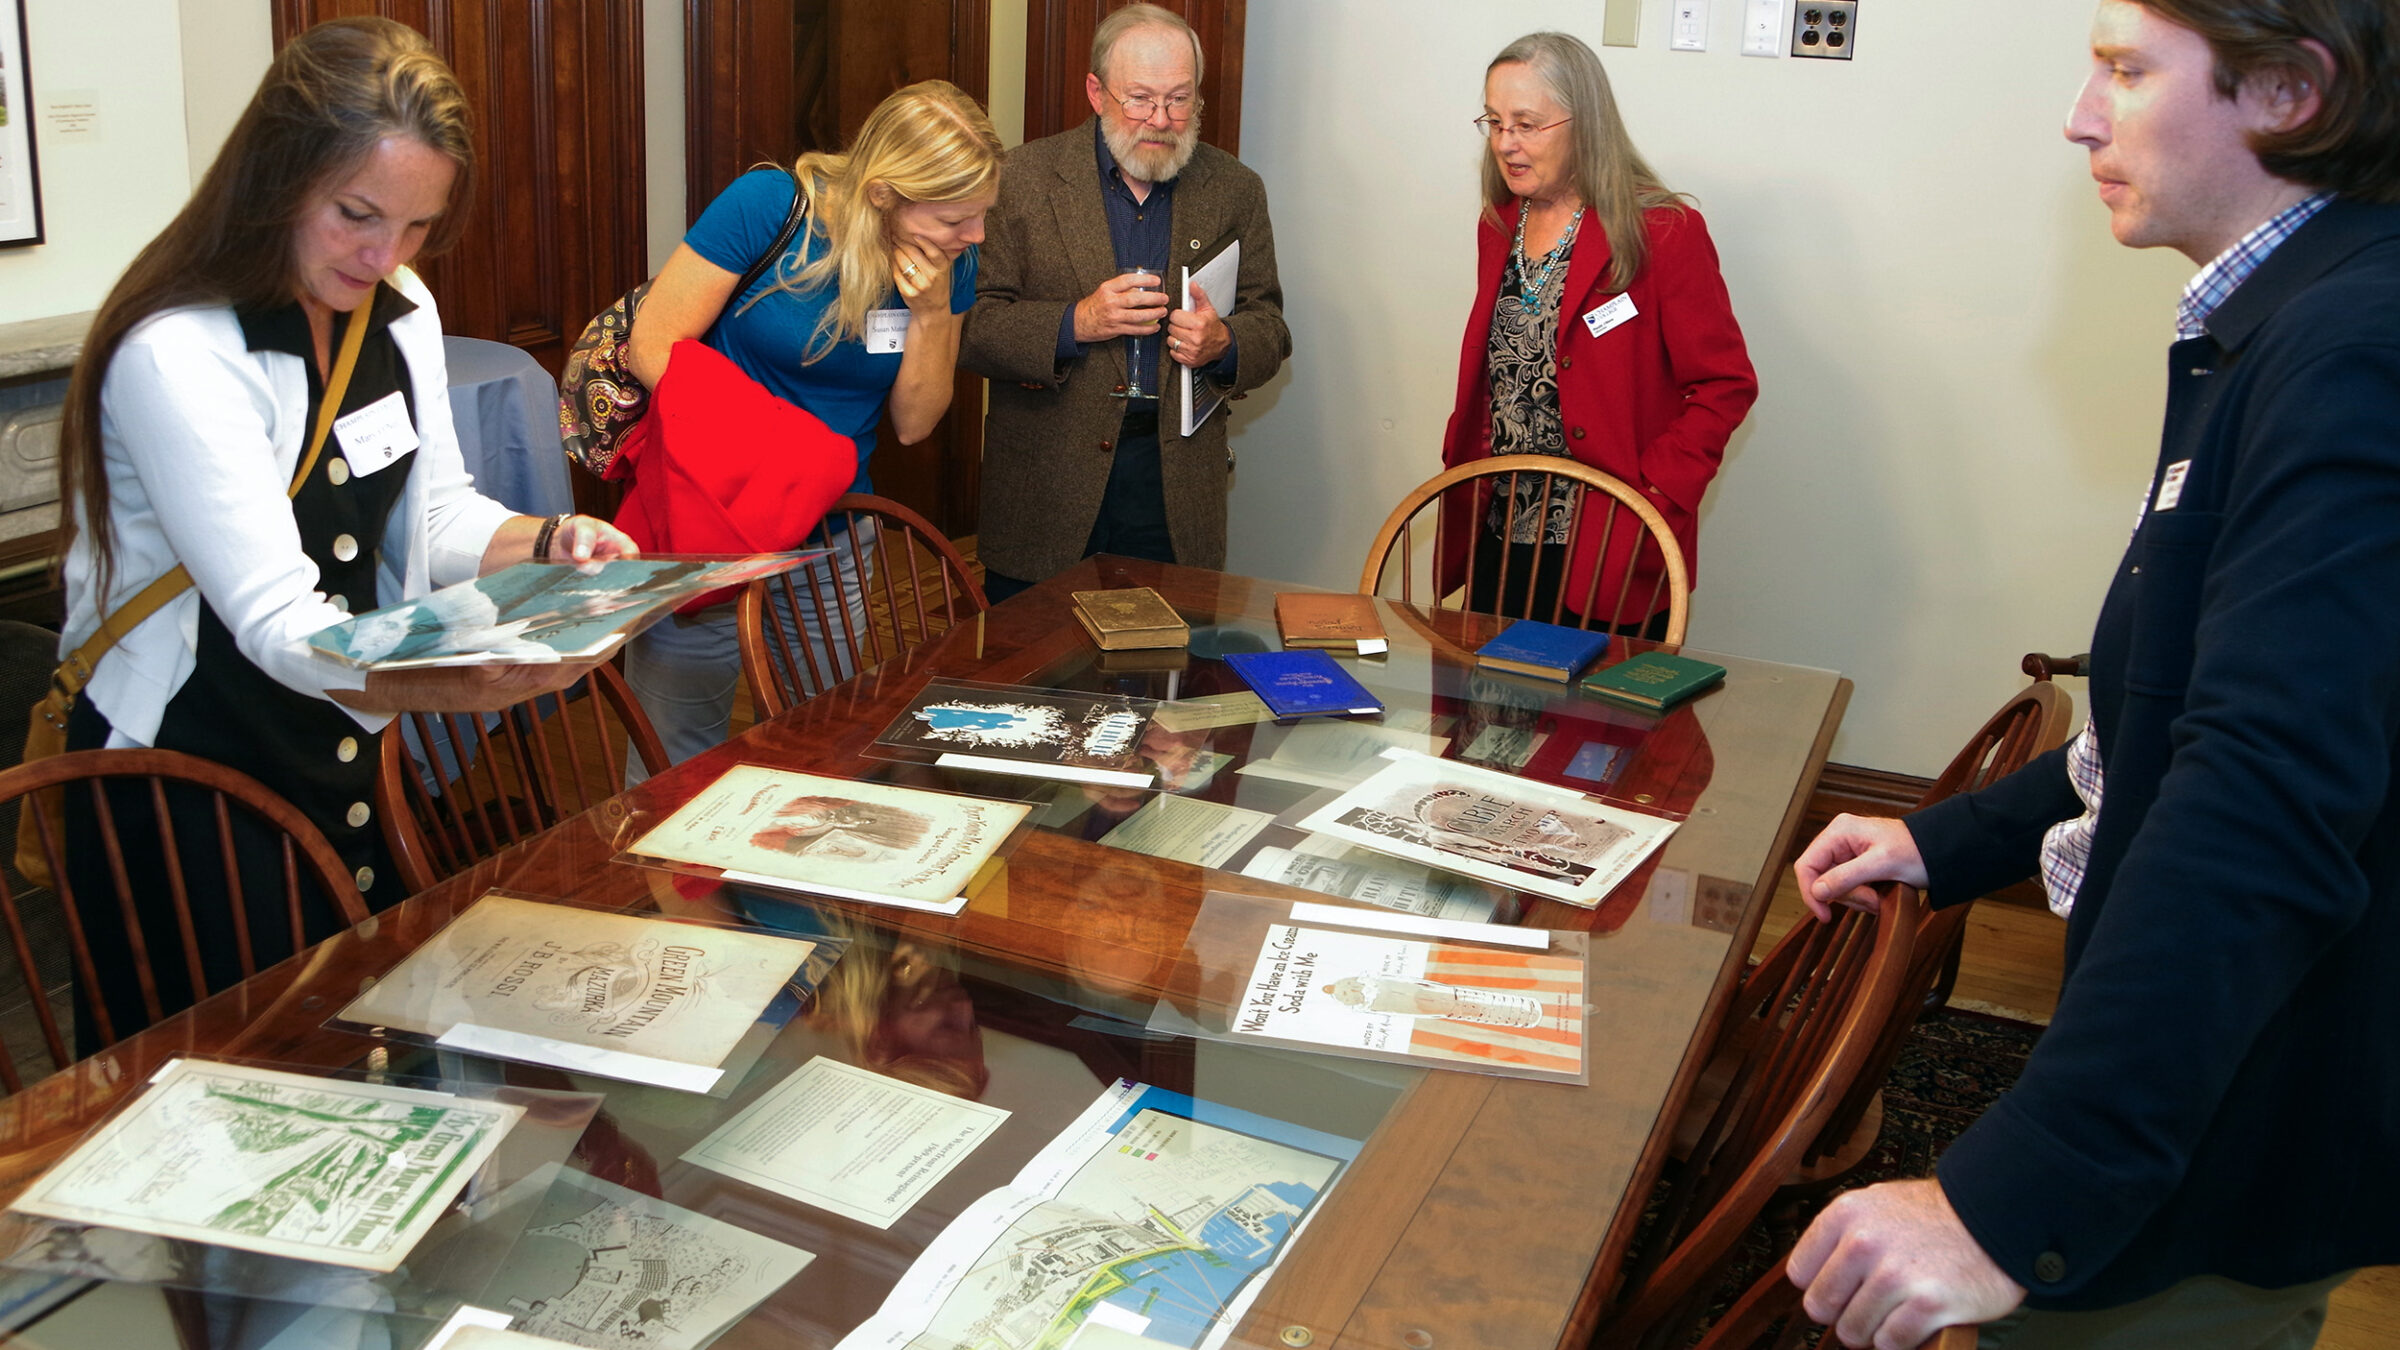 Several people stand around a table looking at sheet music covers, maps, and books on display both on top of the table and under a glass tabletop.